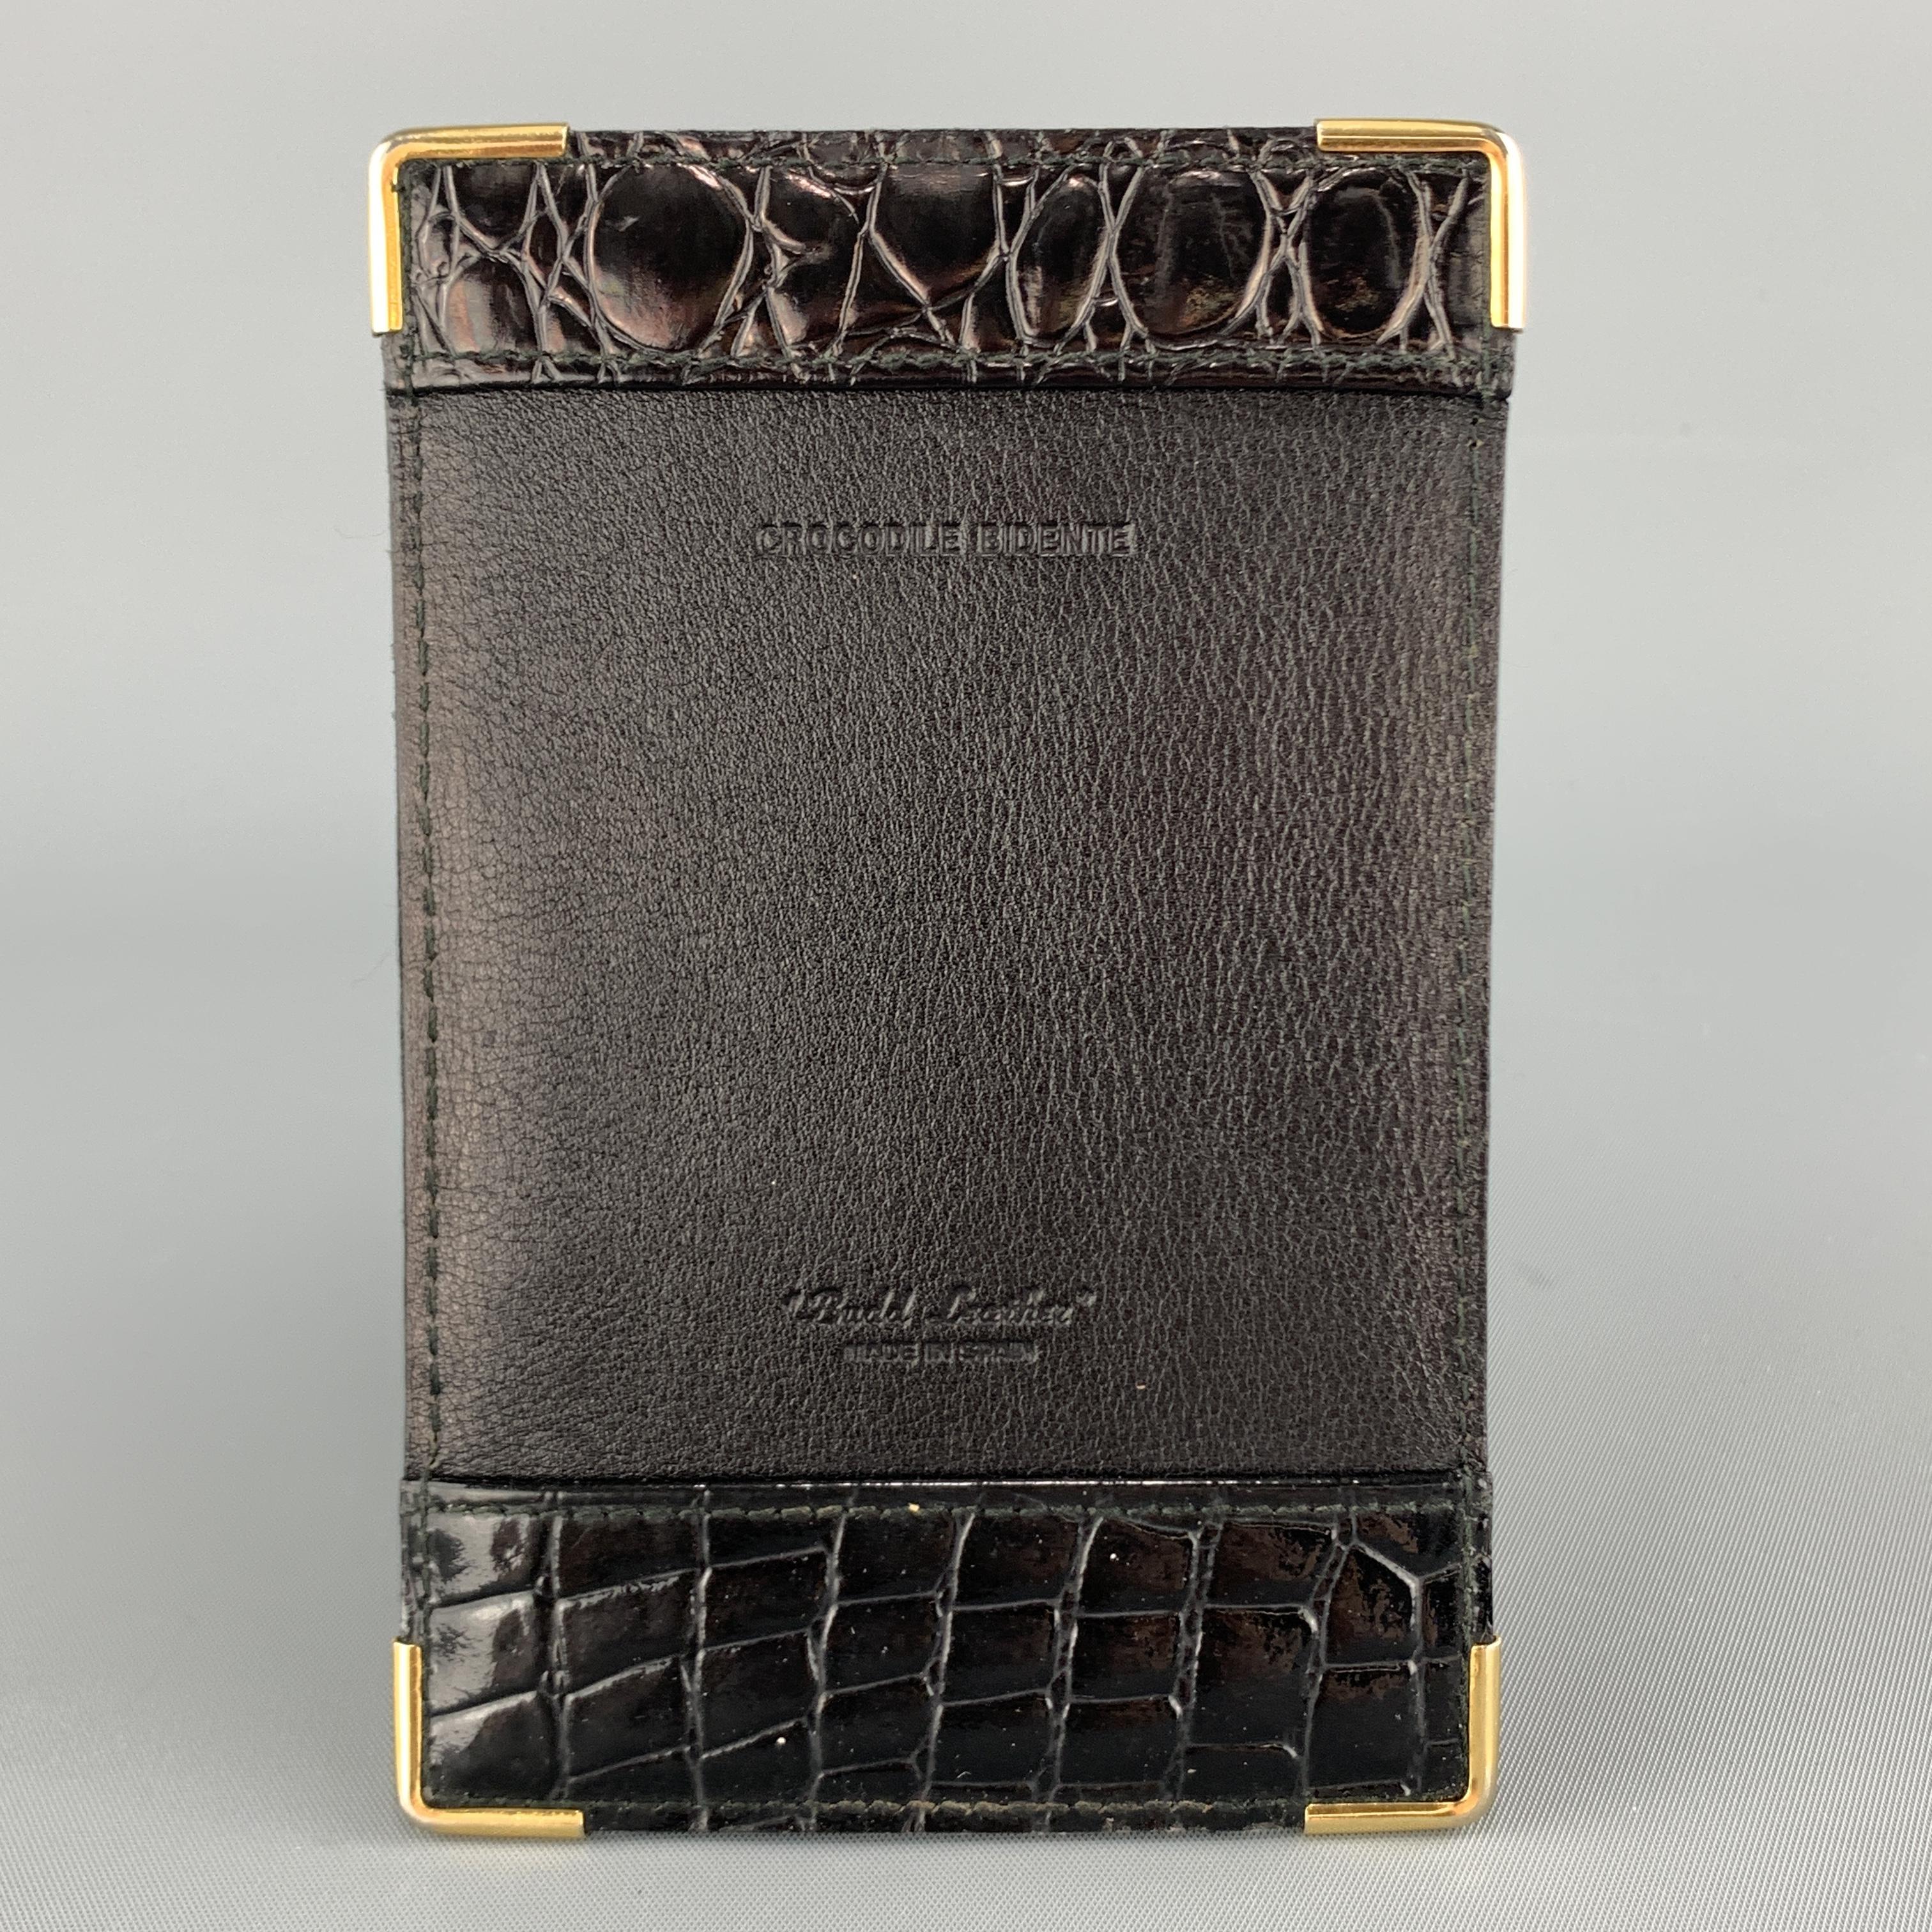 BUDD LEATHER card ticket case wallet comes in black smooth and alligator embossed leather with gold tone metal corners. Made in Spain.

Very Good Pre-Owned Condition.
5.5 x 3.5 in.